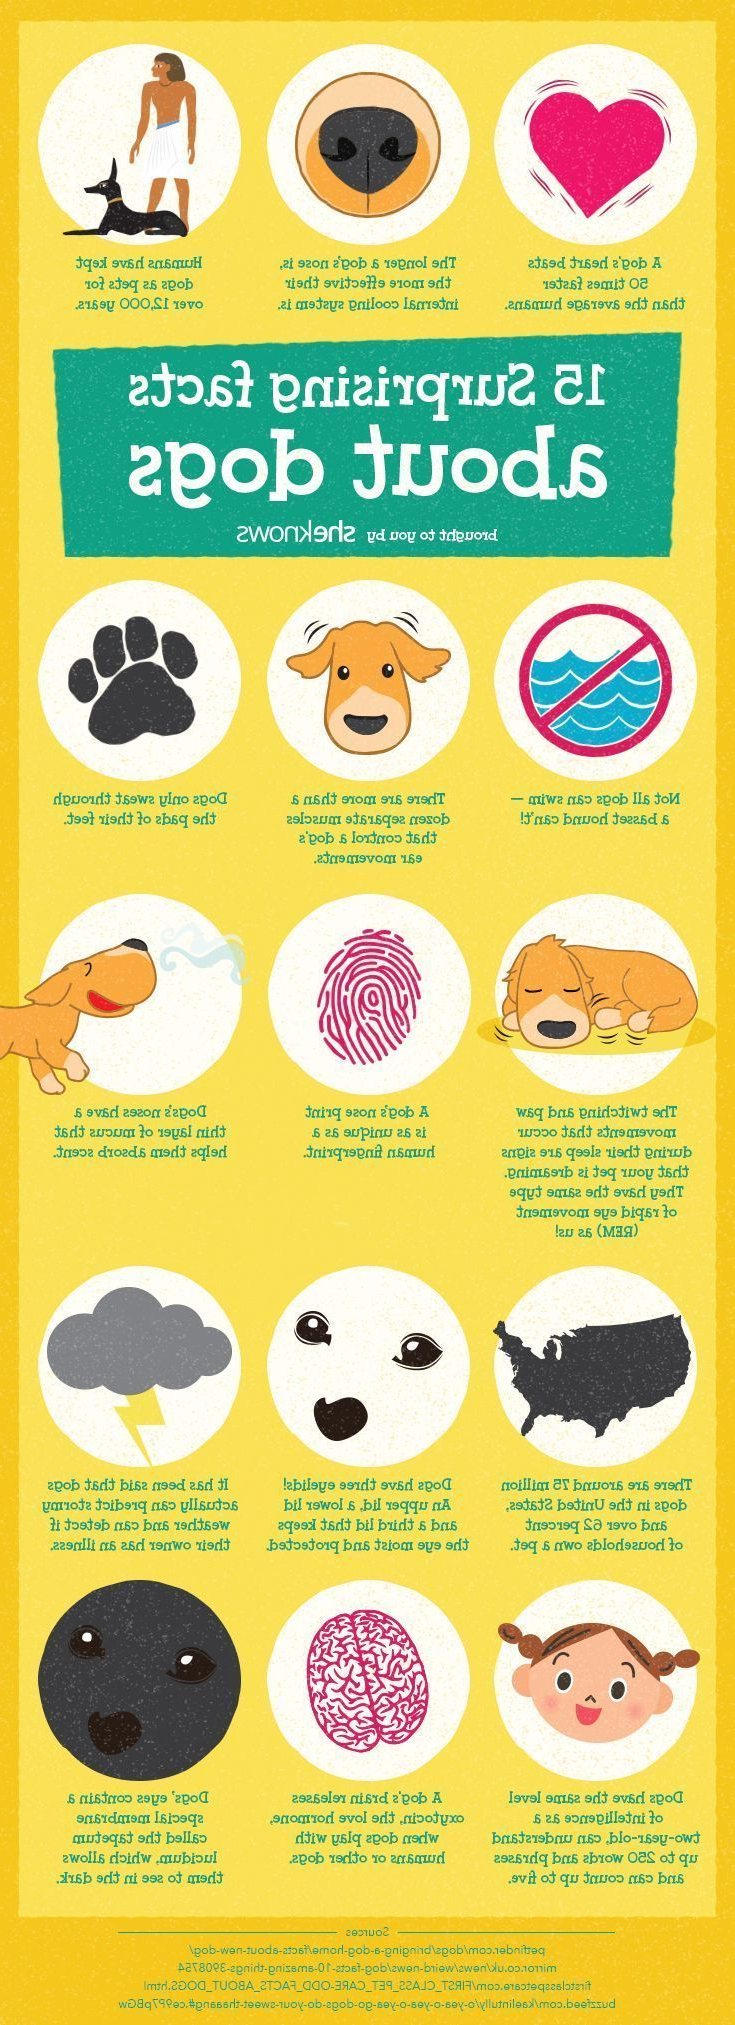 Amazing Dog Facts That Will Make You Love Your Pup Even